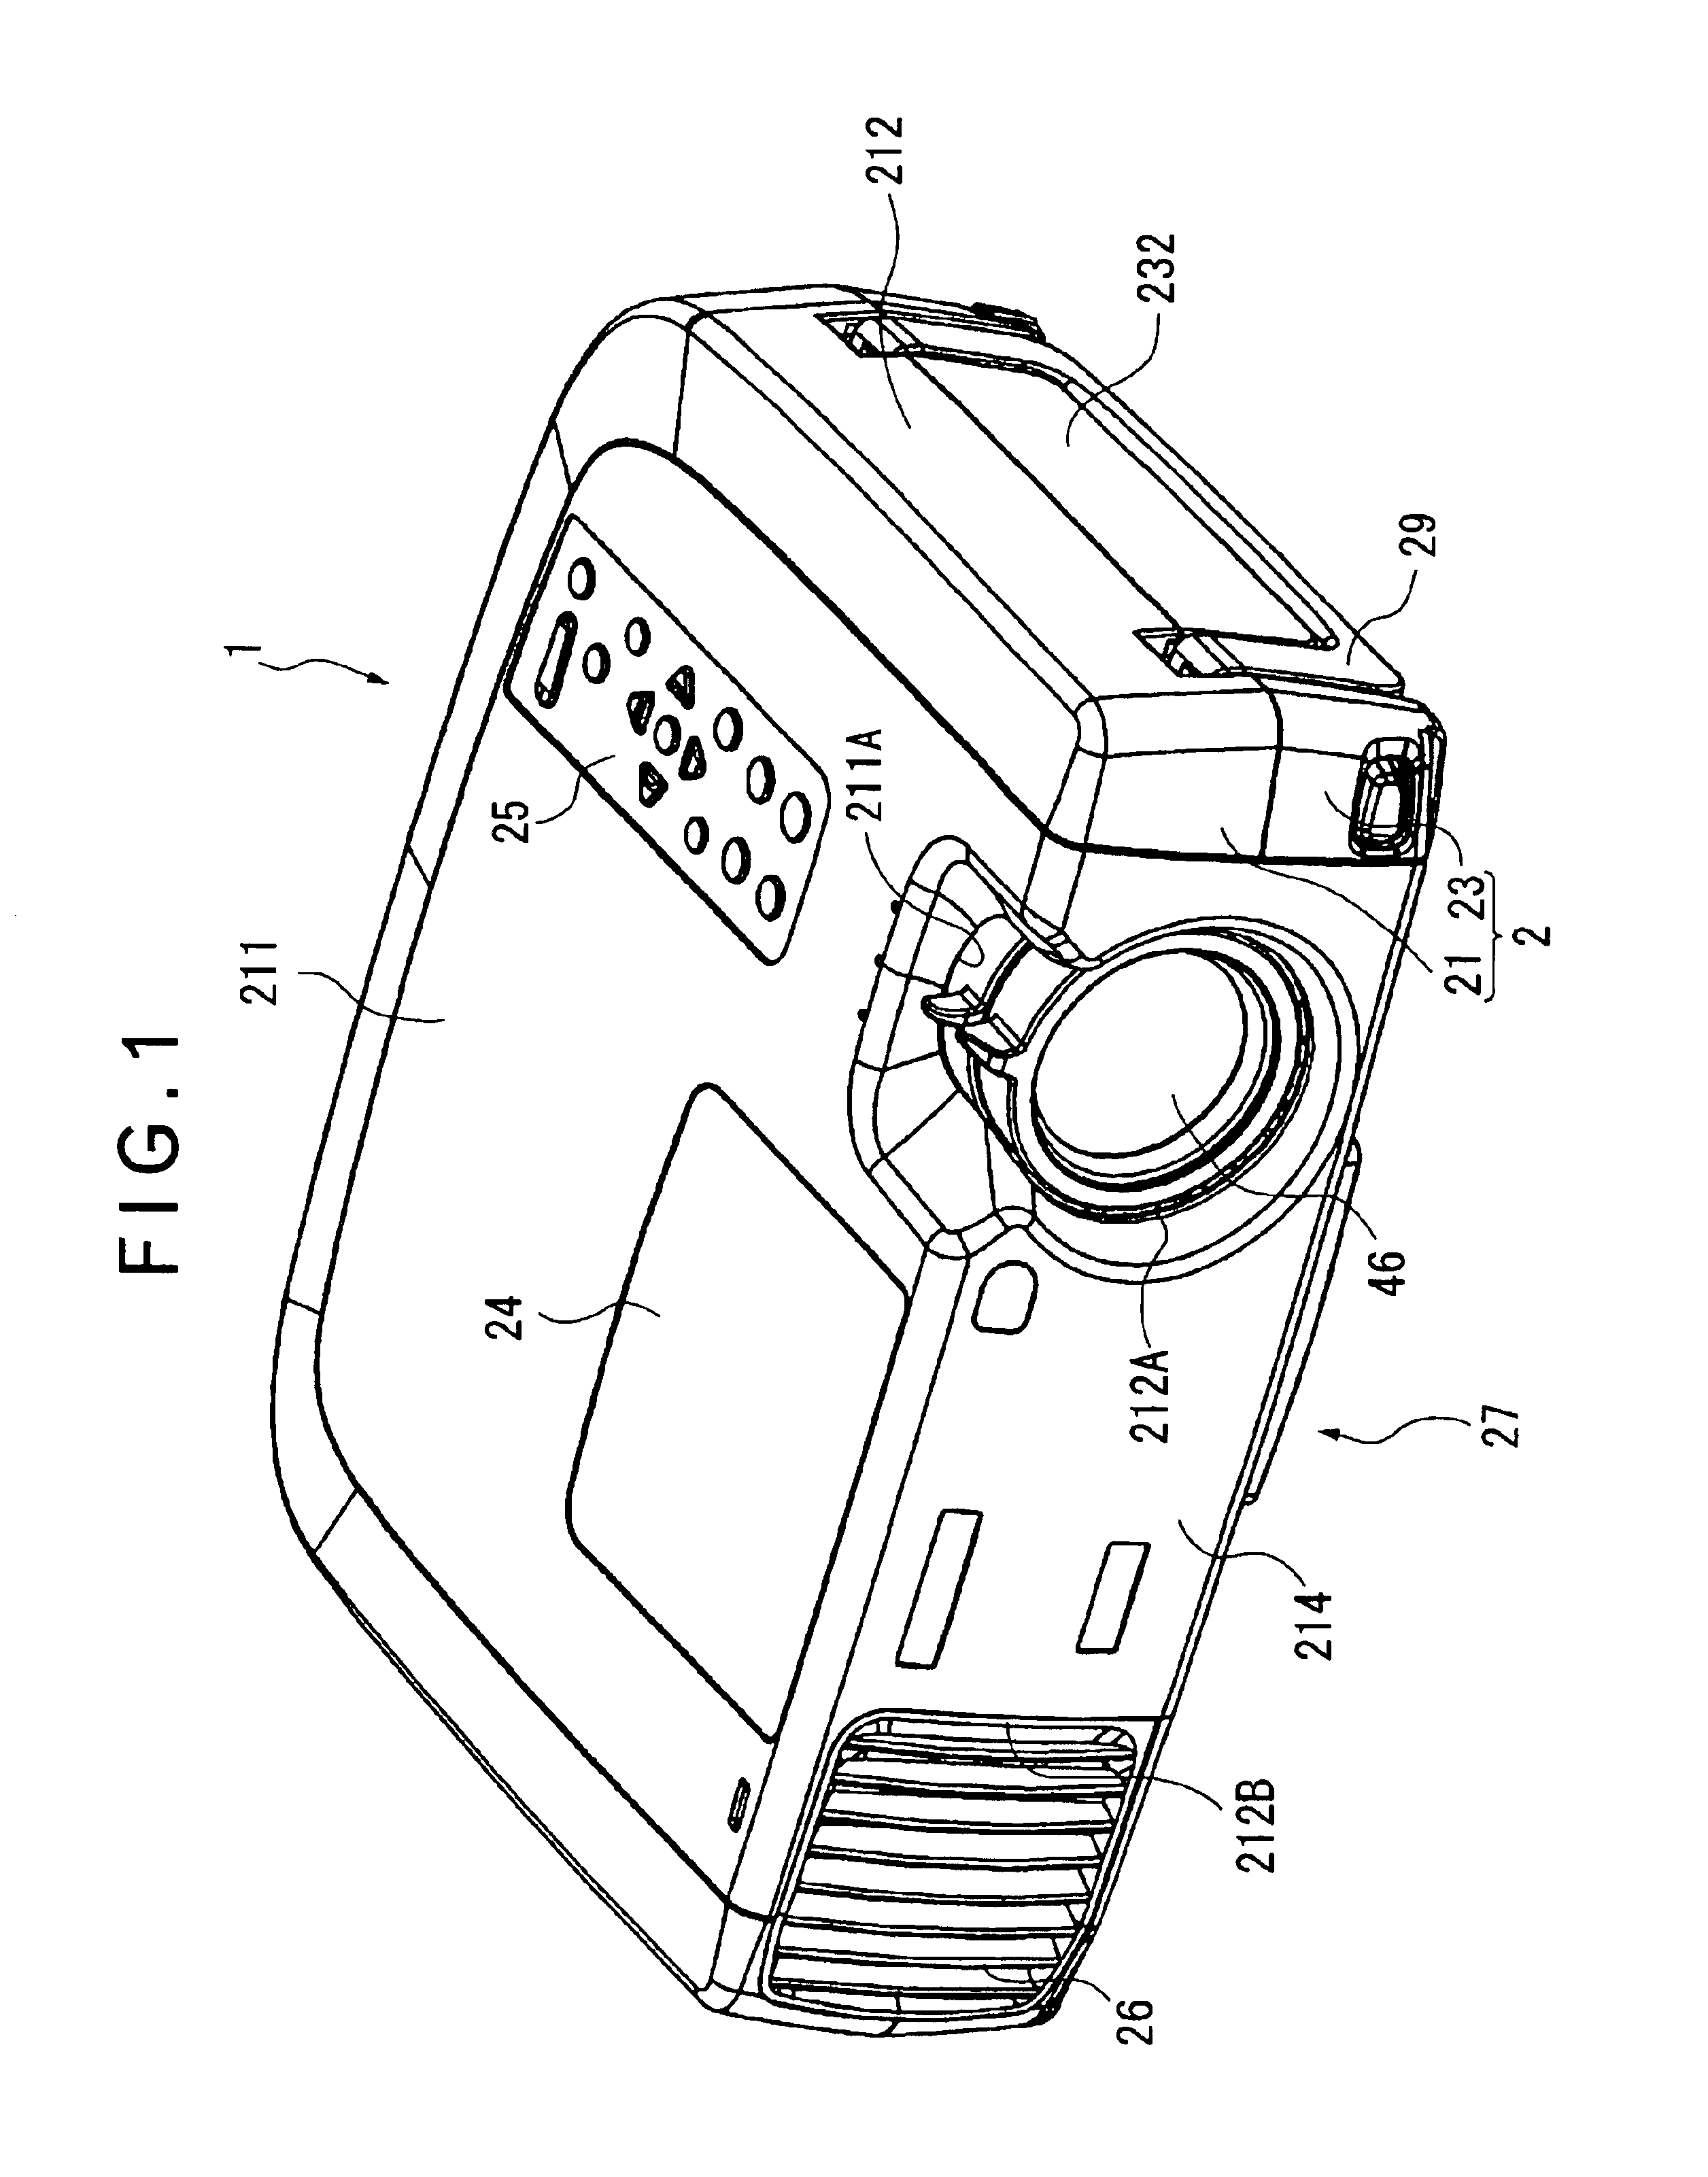 Cooler for electro optic device and projector